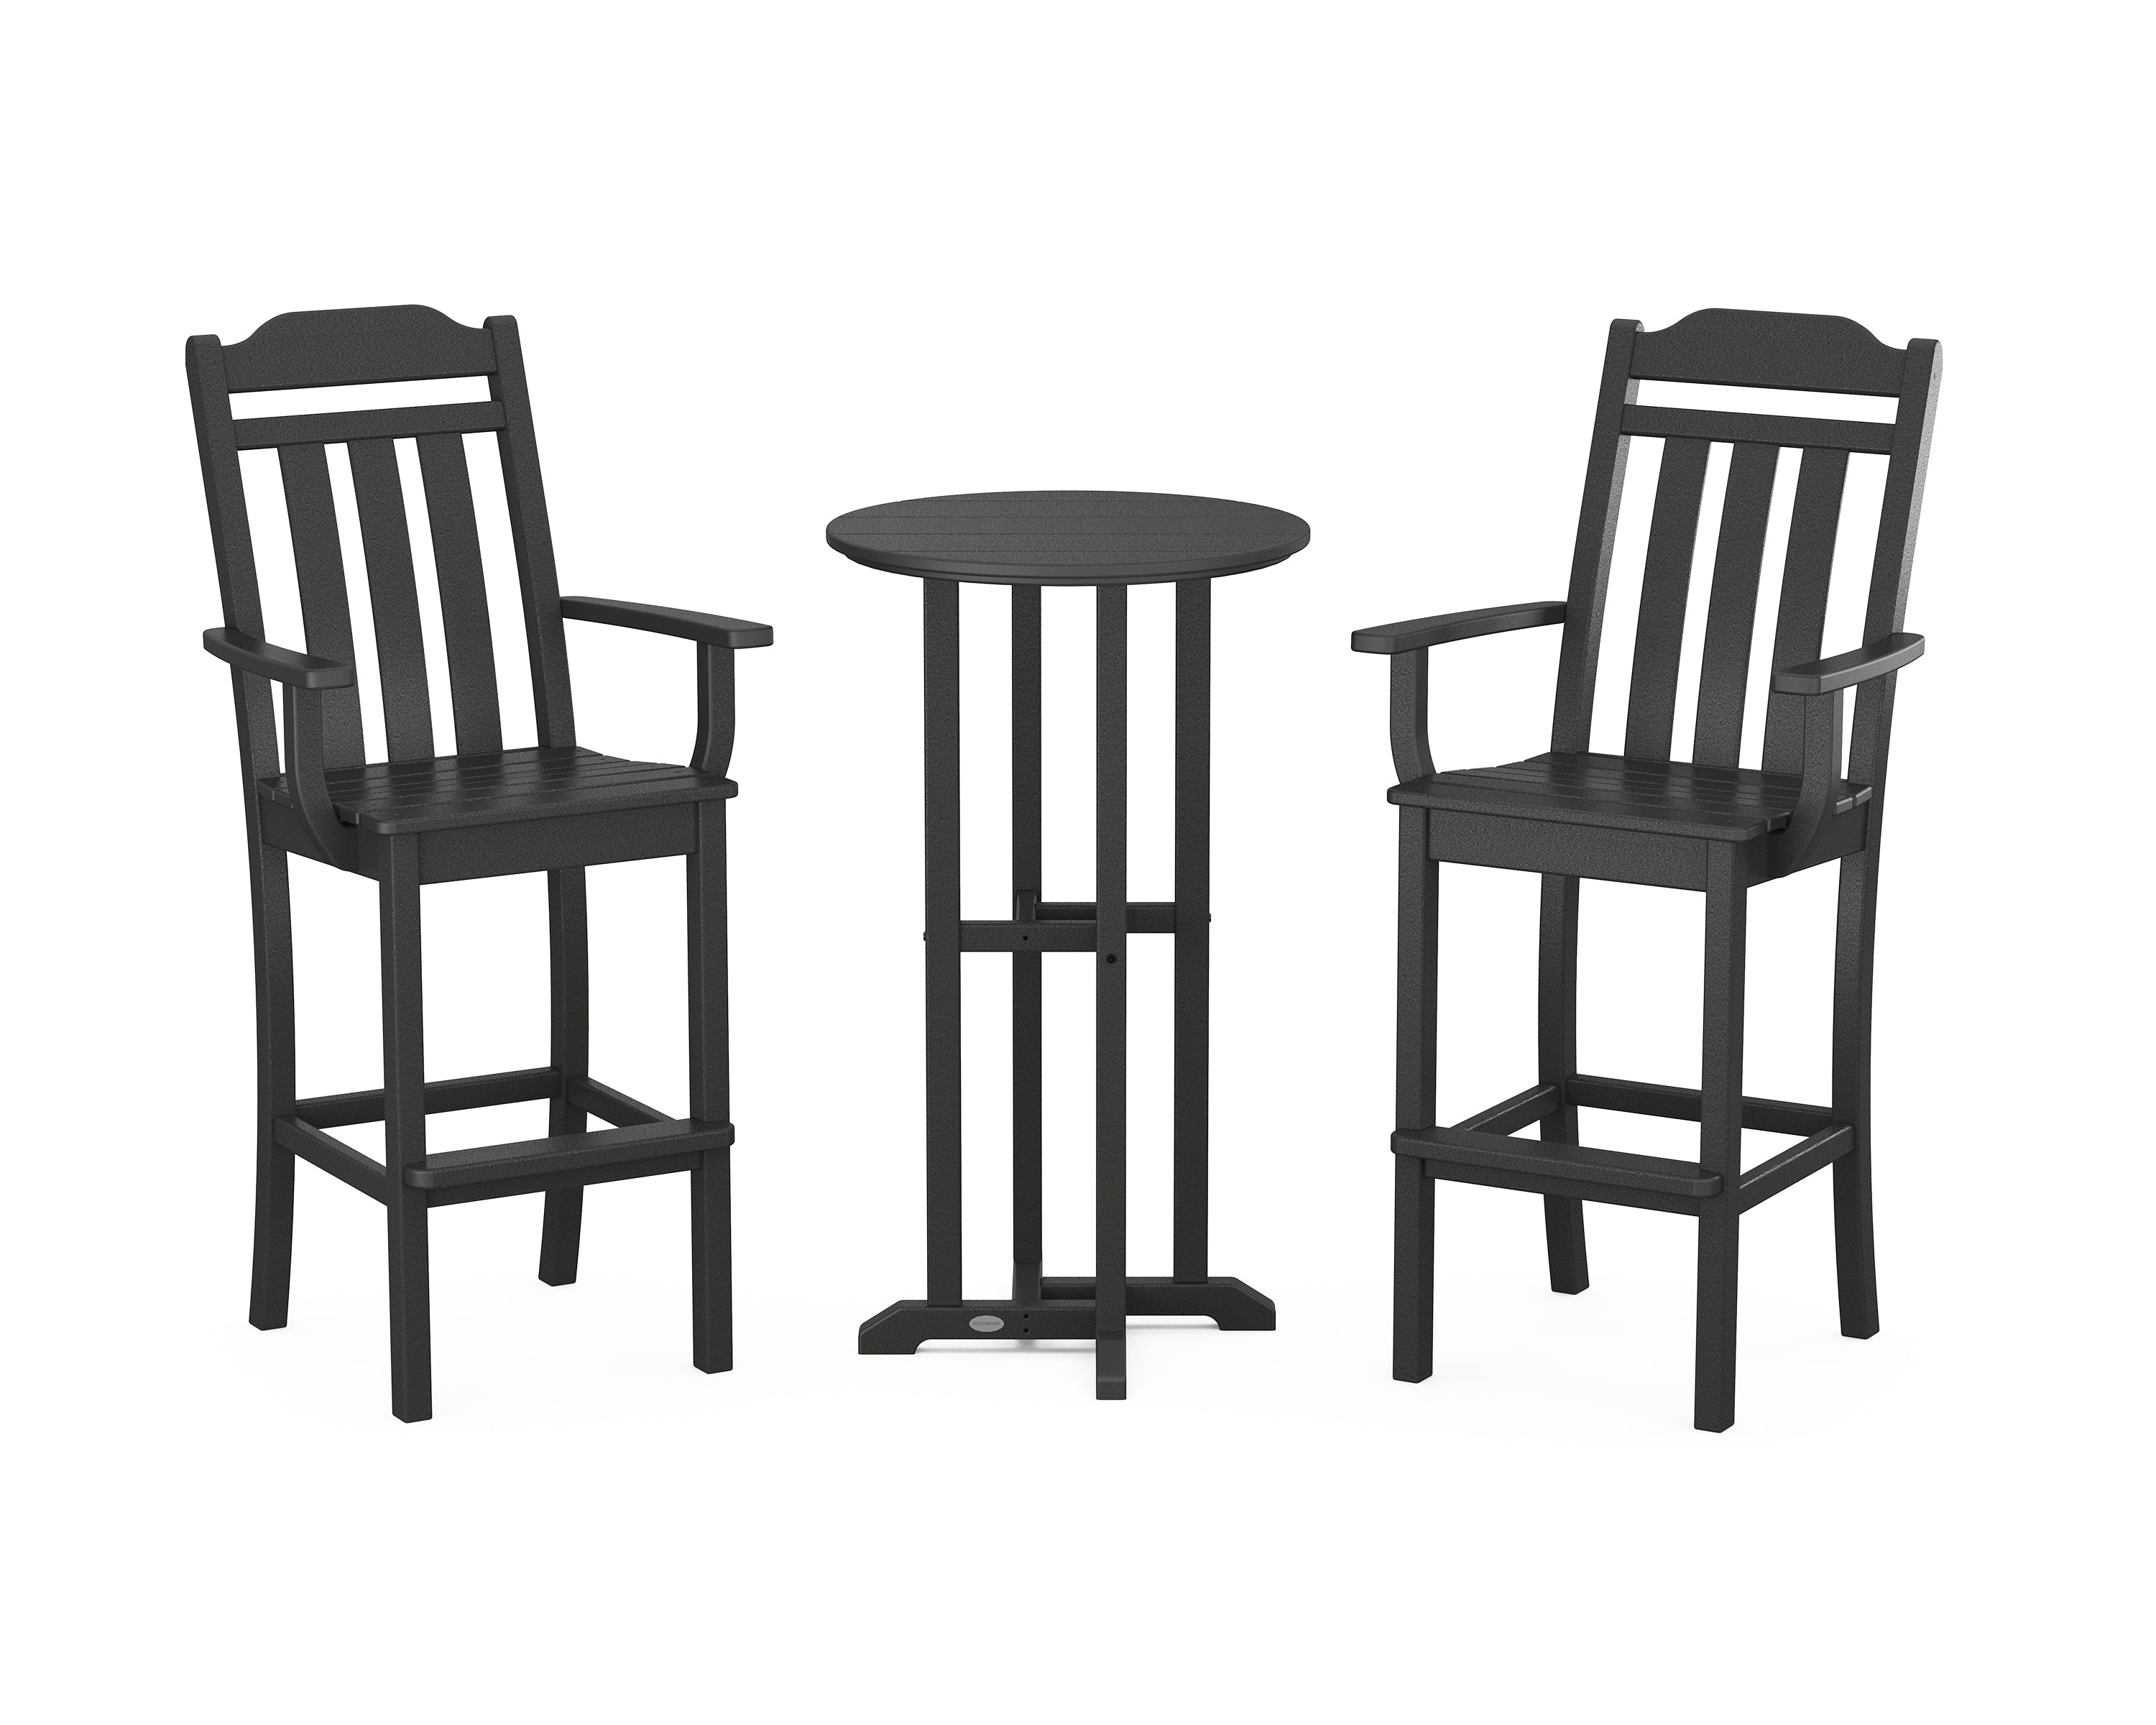 POLYWOOD Country Living 3-Piece Farmhouse Bar Set in Black